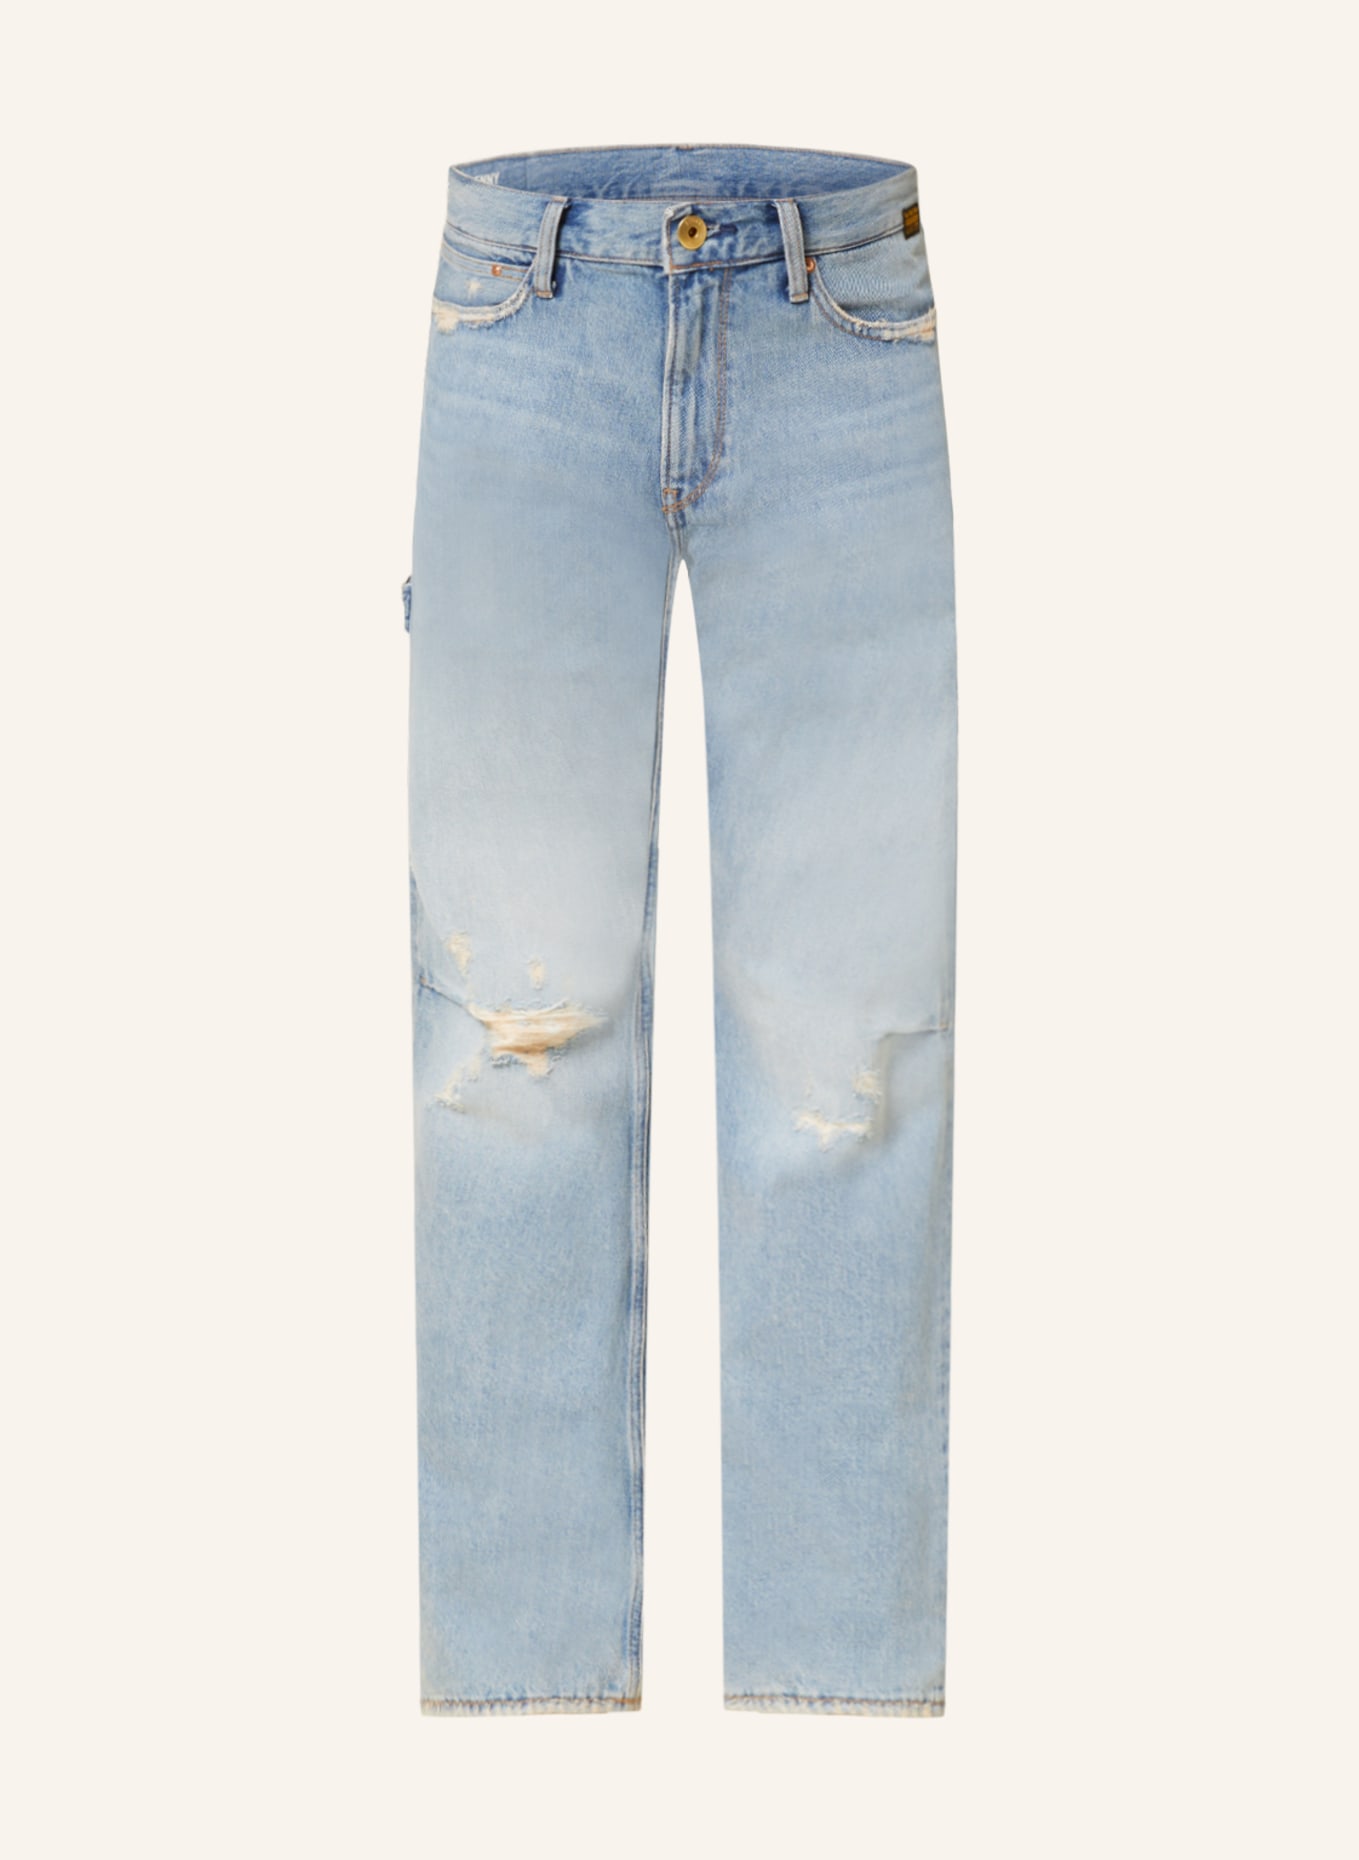 G-Star RAW Destroyed jeans LENNEY BOOTCUT regular fit, Color: G672 sun faded ripped fogbow (Image 1)